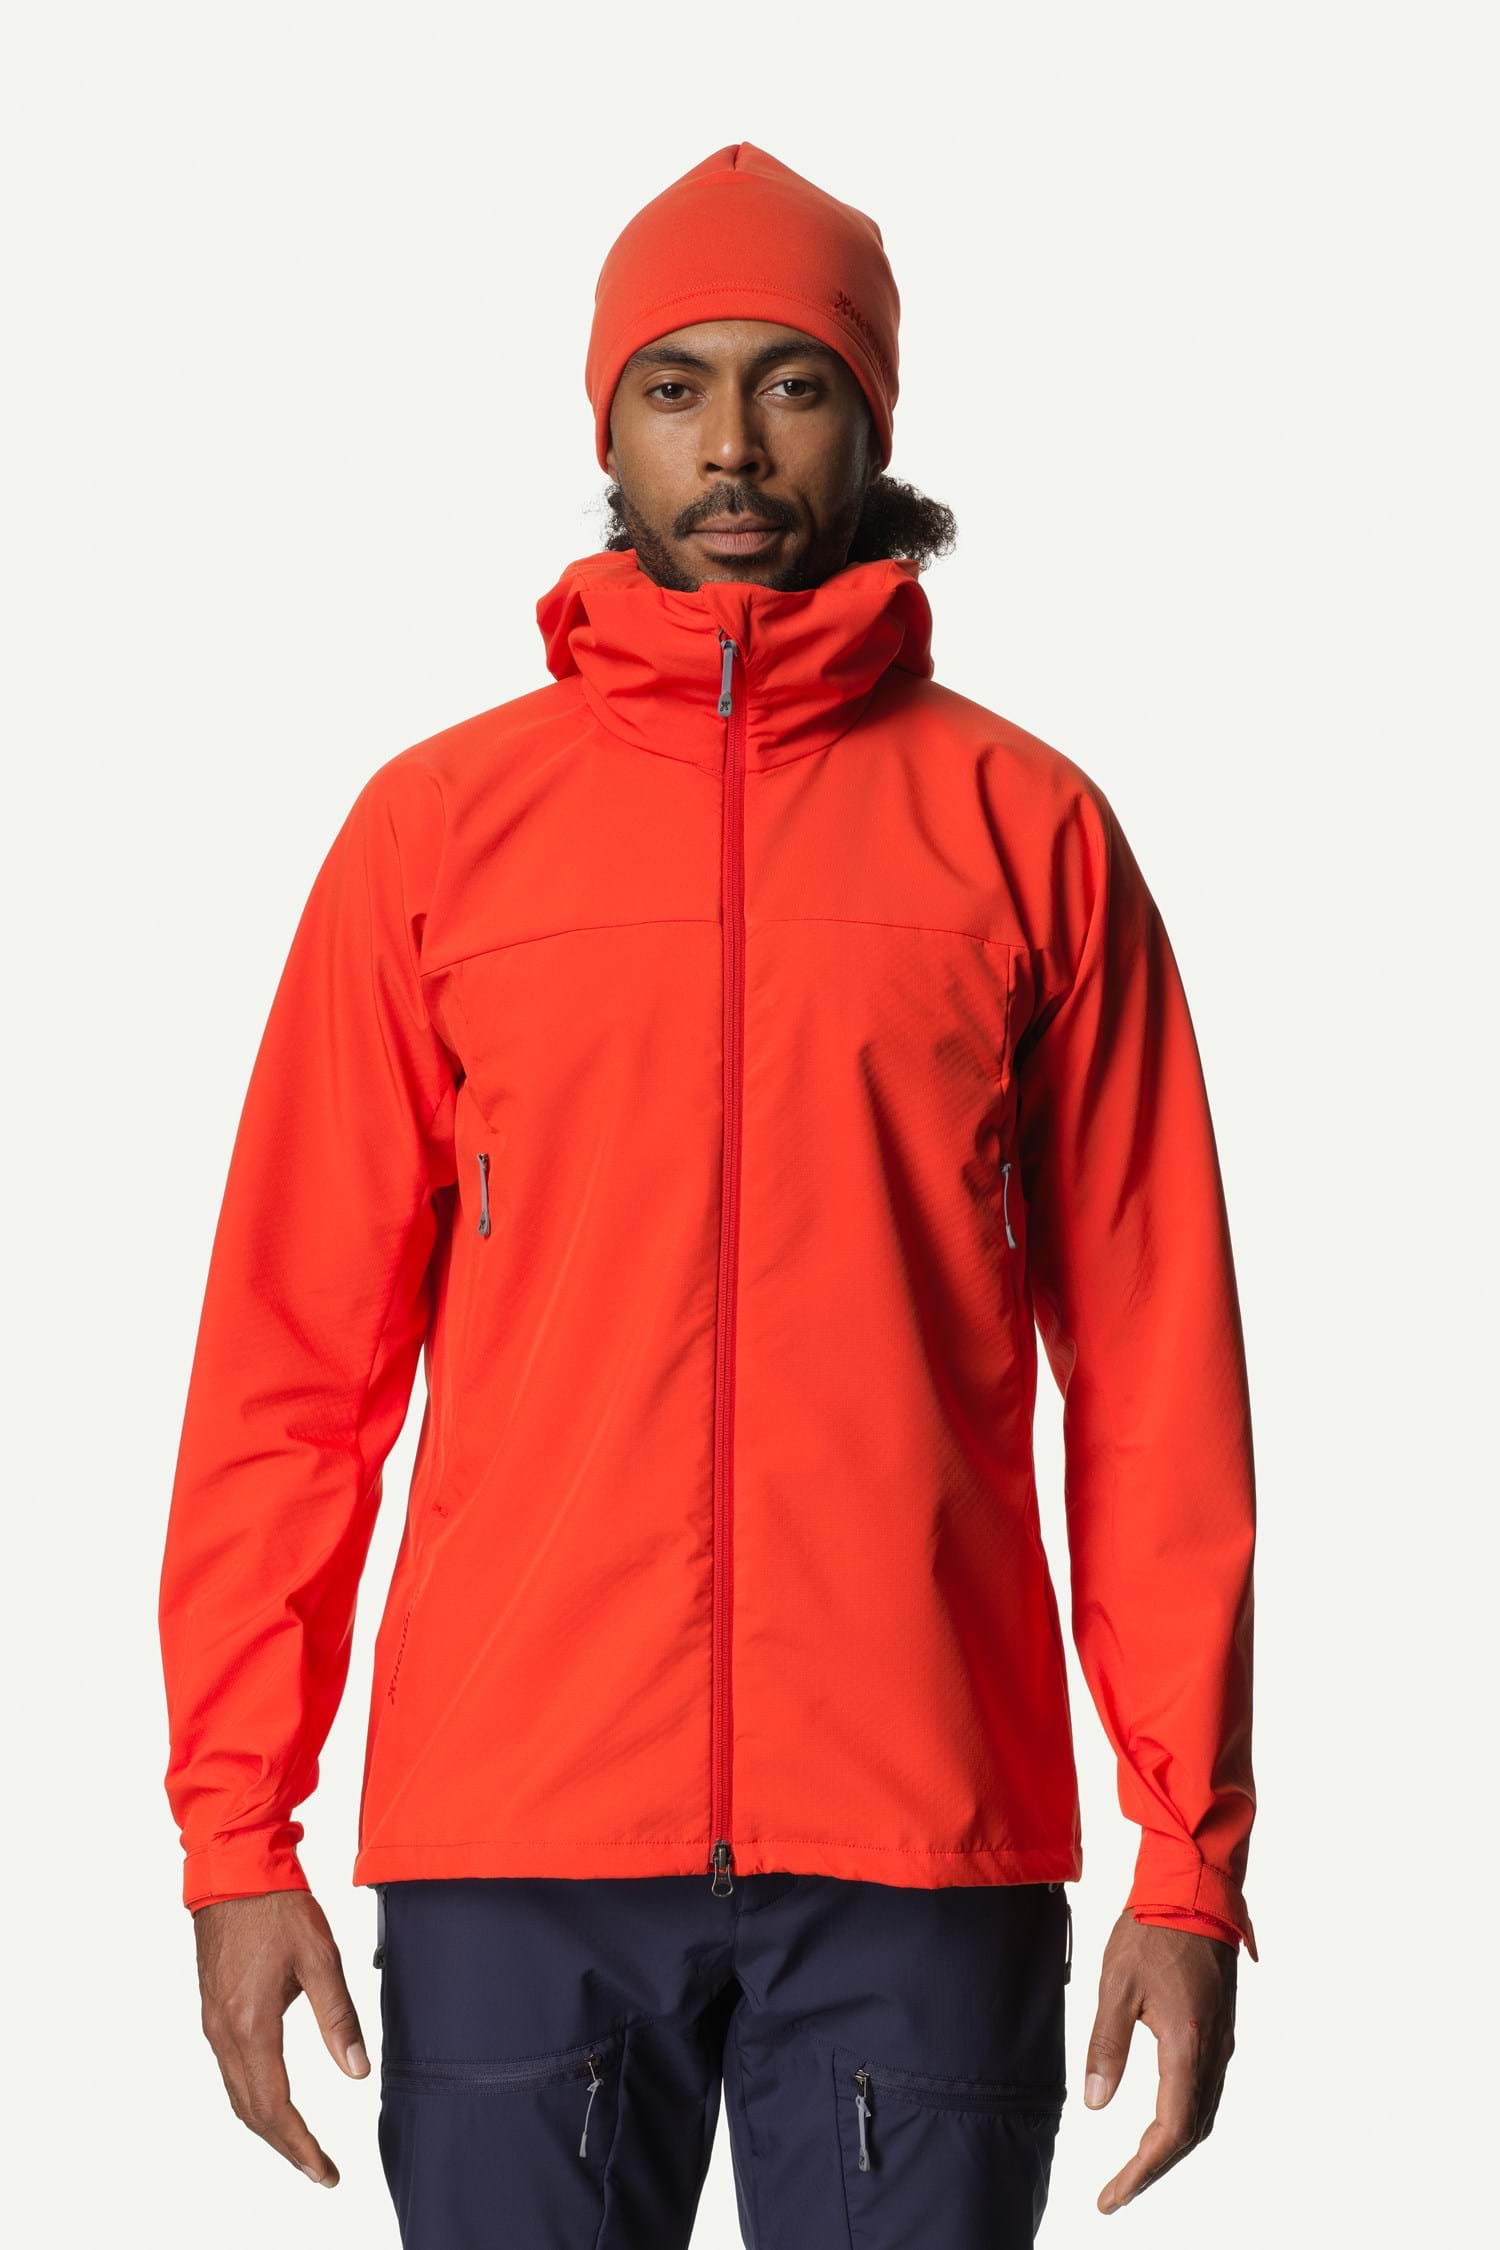 Houdini M's Pace Jacket, More Than Red, S